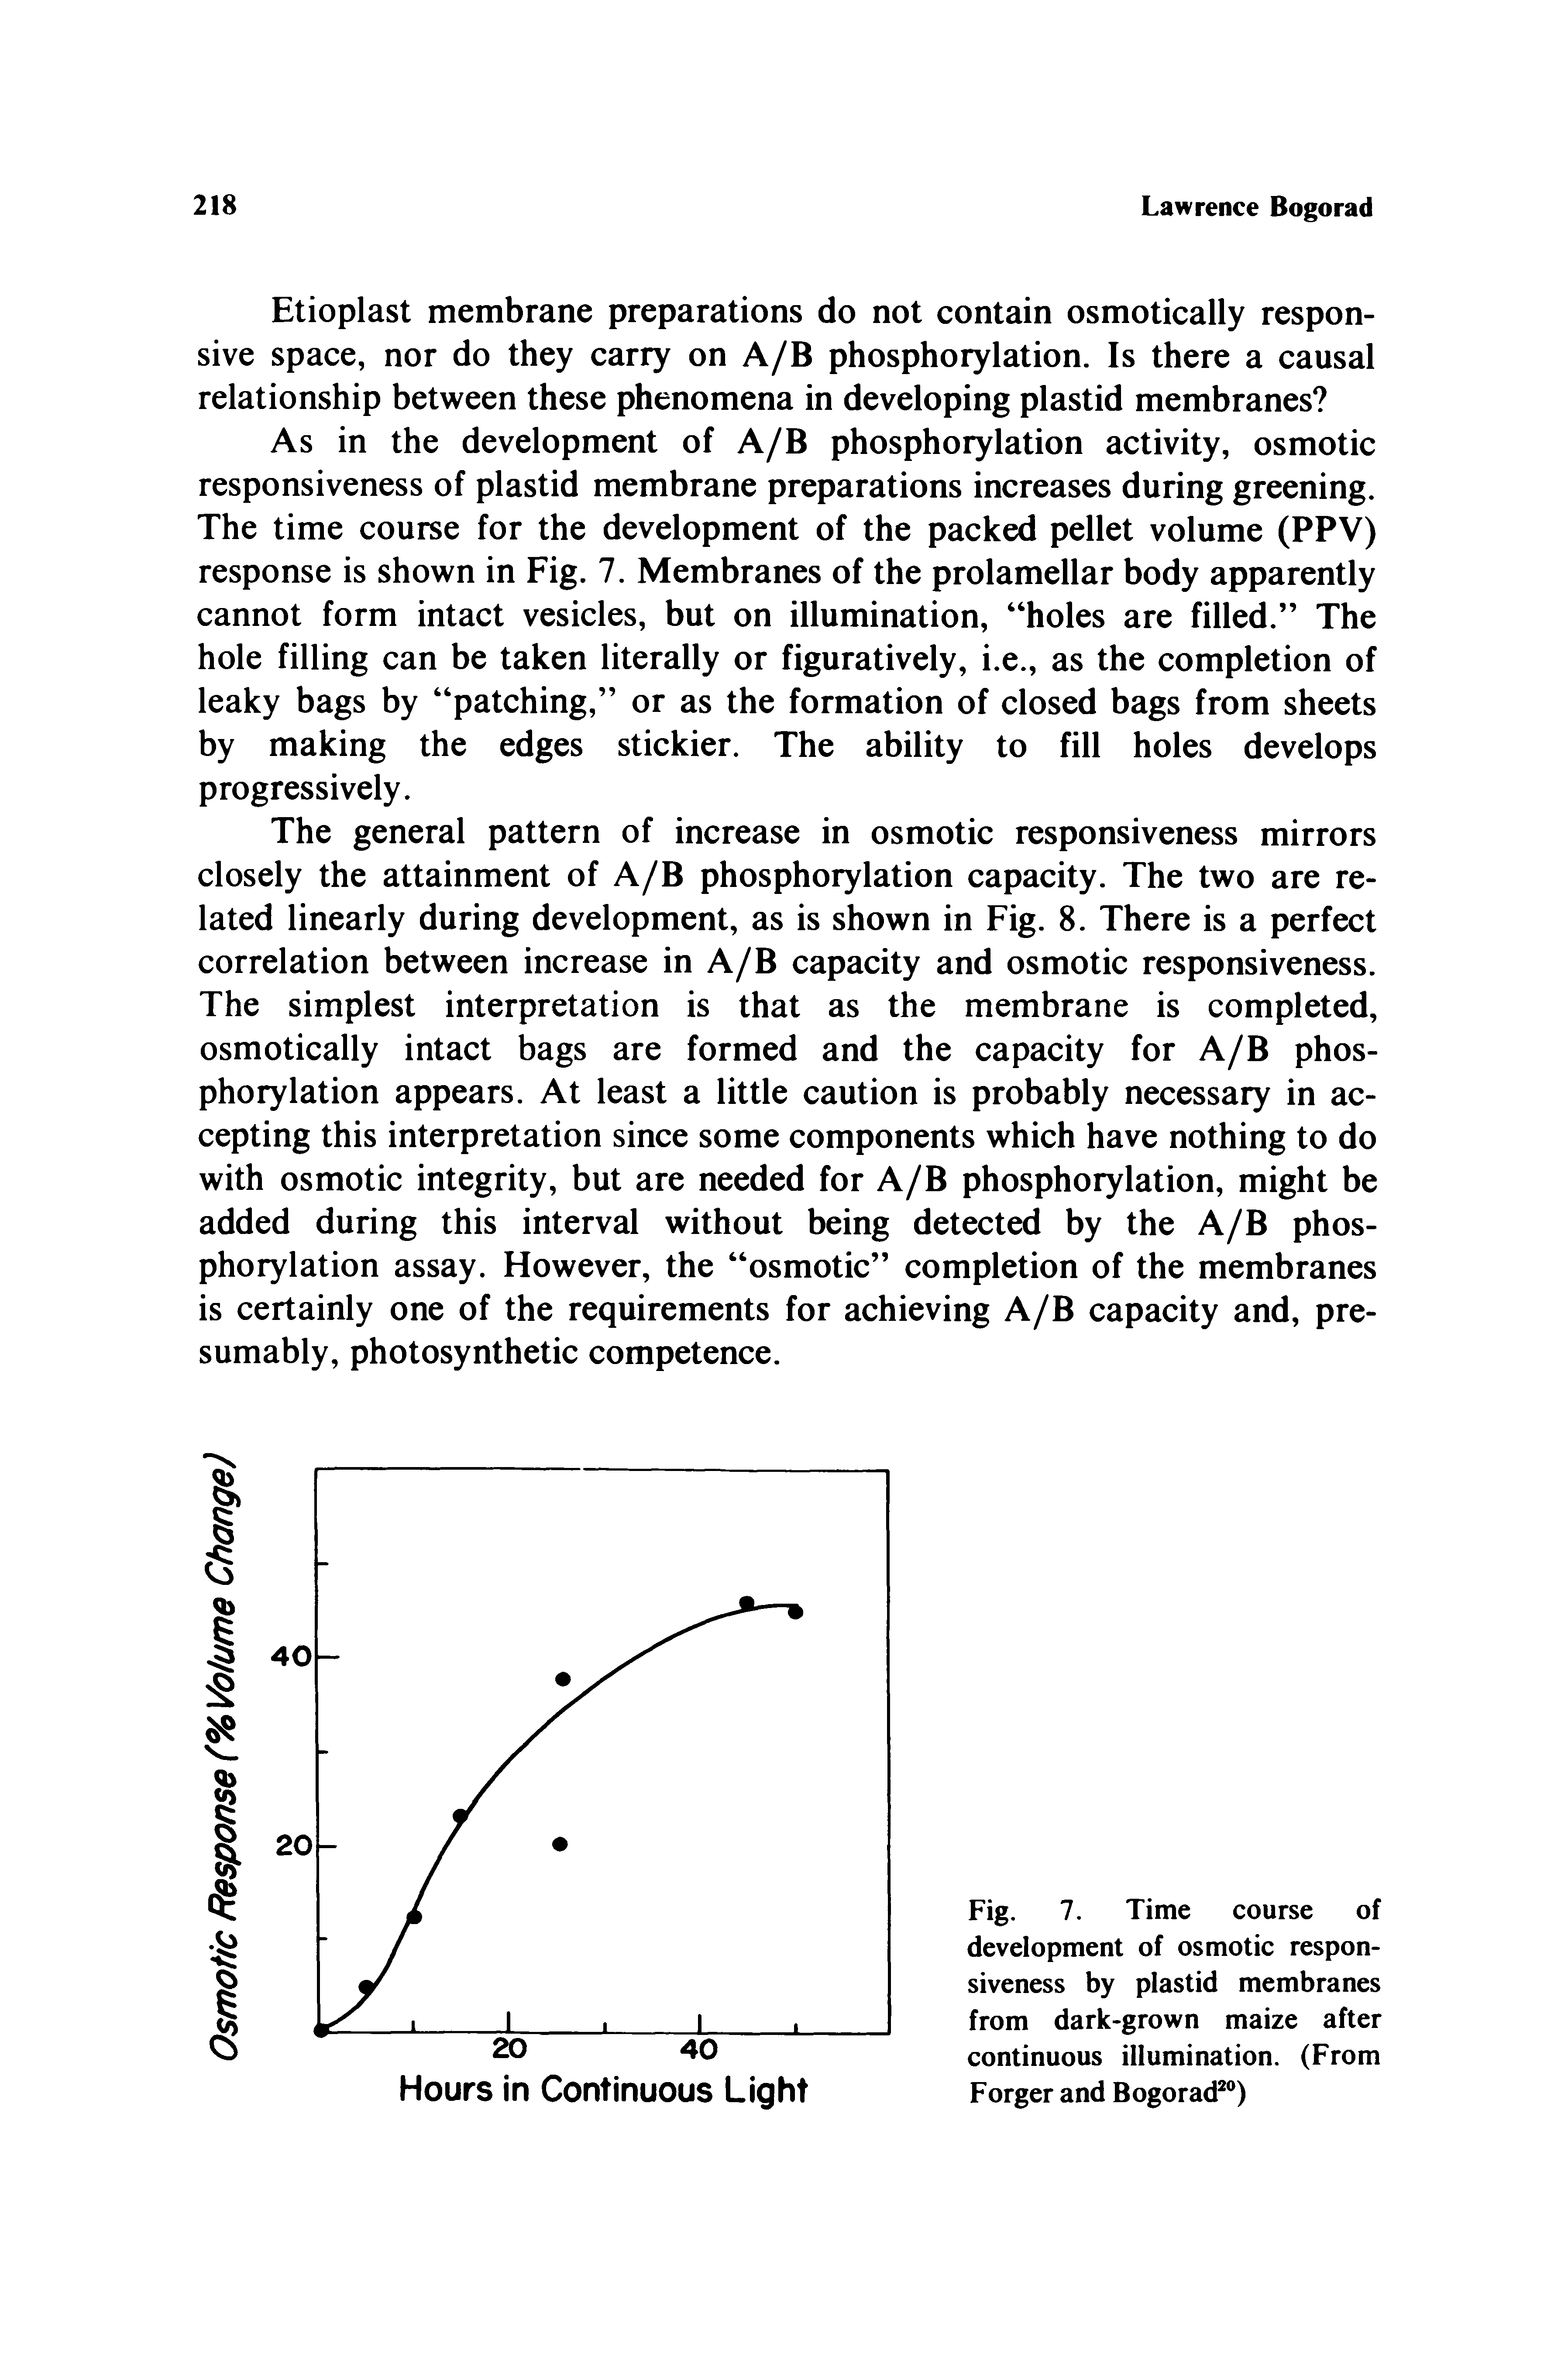 Fig. 7. Time course of development of osmotic responsiveness by plastid membranes from dark-grown maize after continuous illumination. (From Forger and Bogorad )...